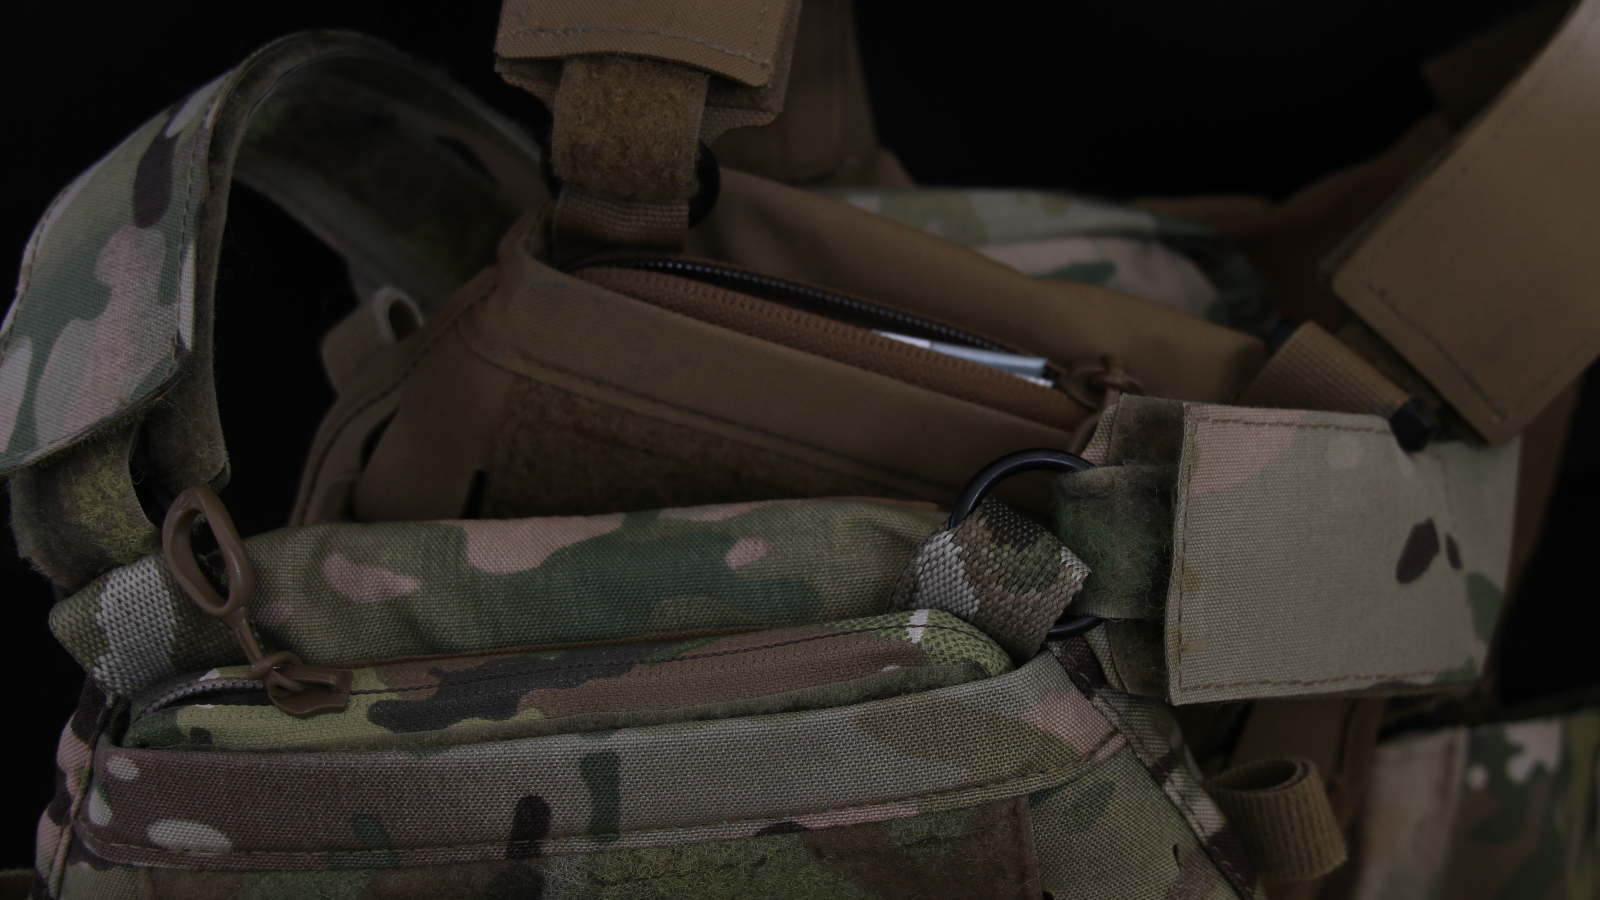 PLATE CARRIER ACCESSORIES – Boreal Defence